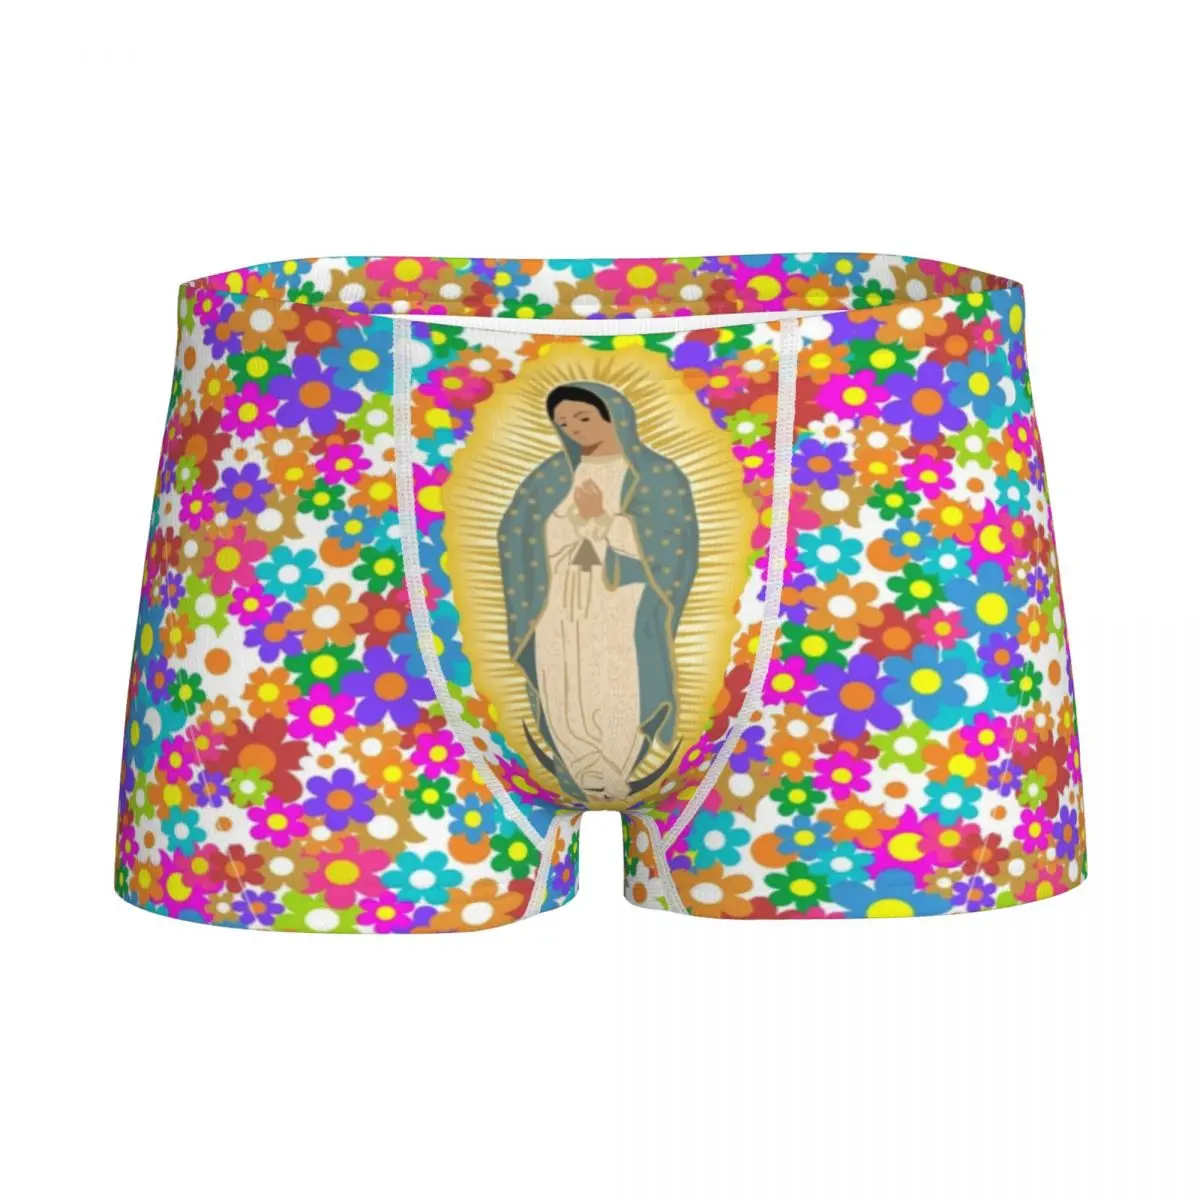 

Boys Our Lady Of Guadalupe Mexican Virgin Mary Mexico Boxers Cotton Young Underwear Children's Panties Teenagers Underpants